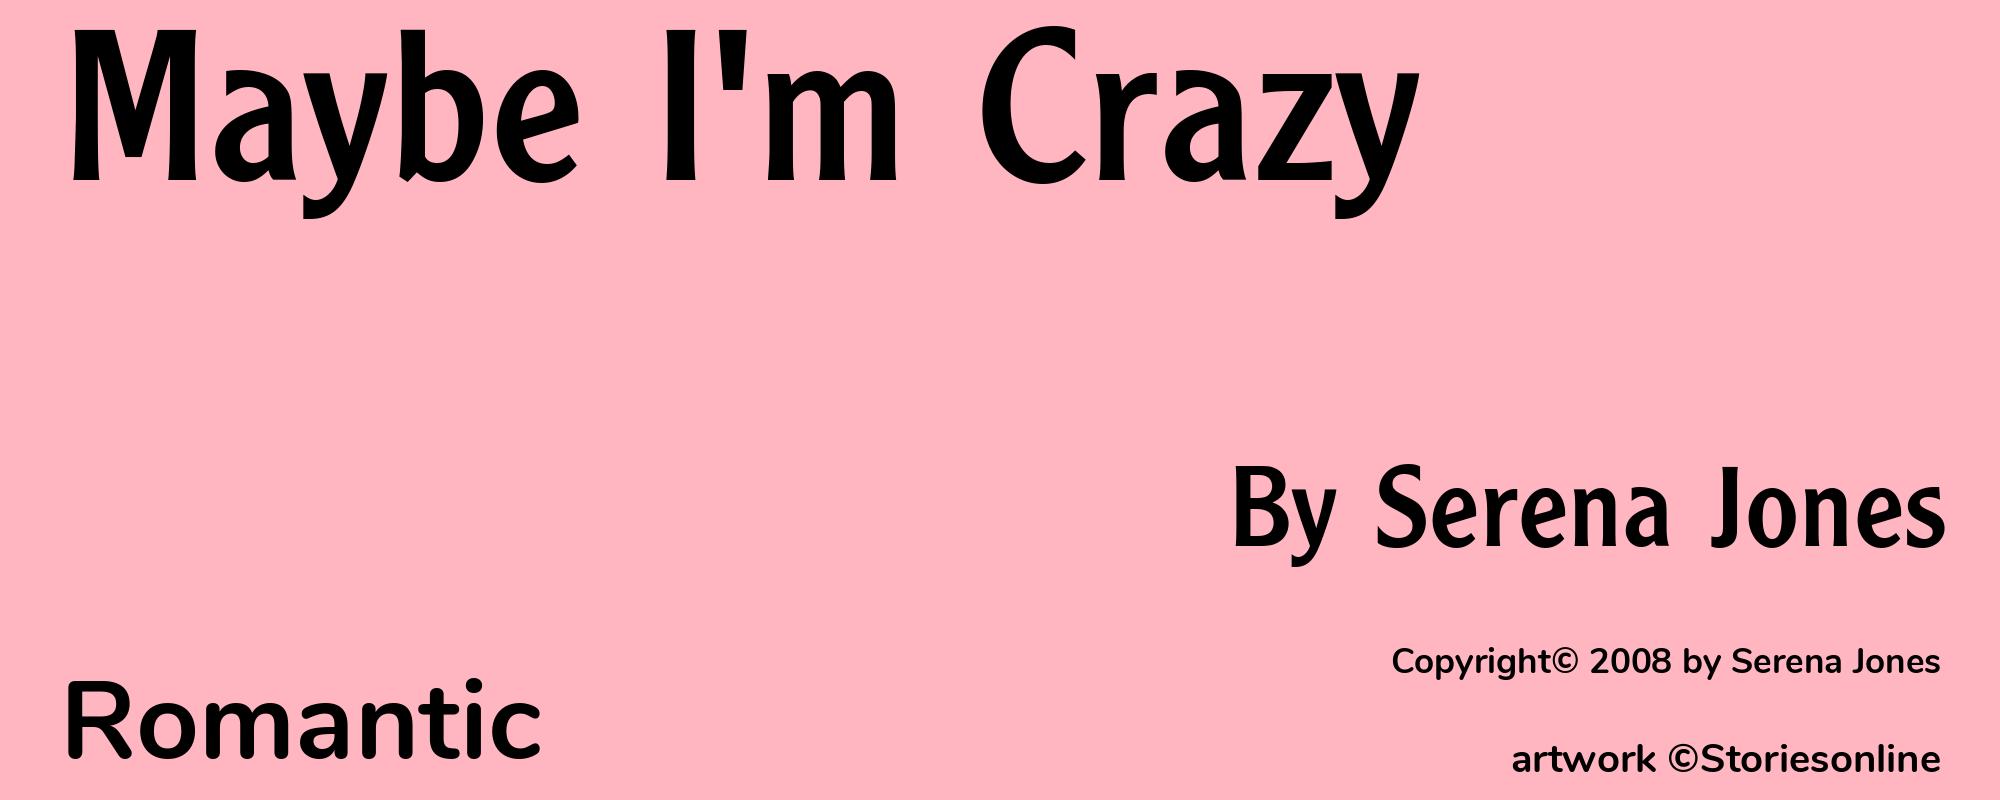 Maybe I'm Crazy - Cover